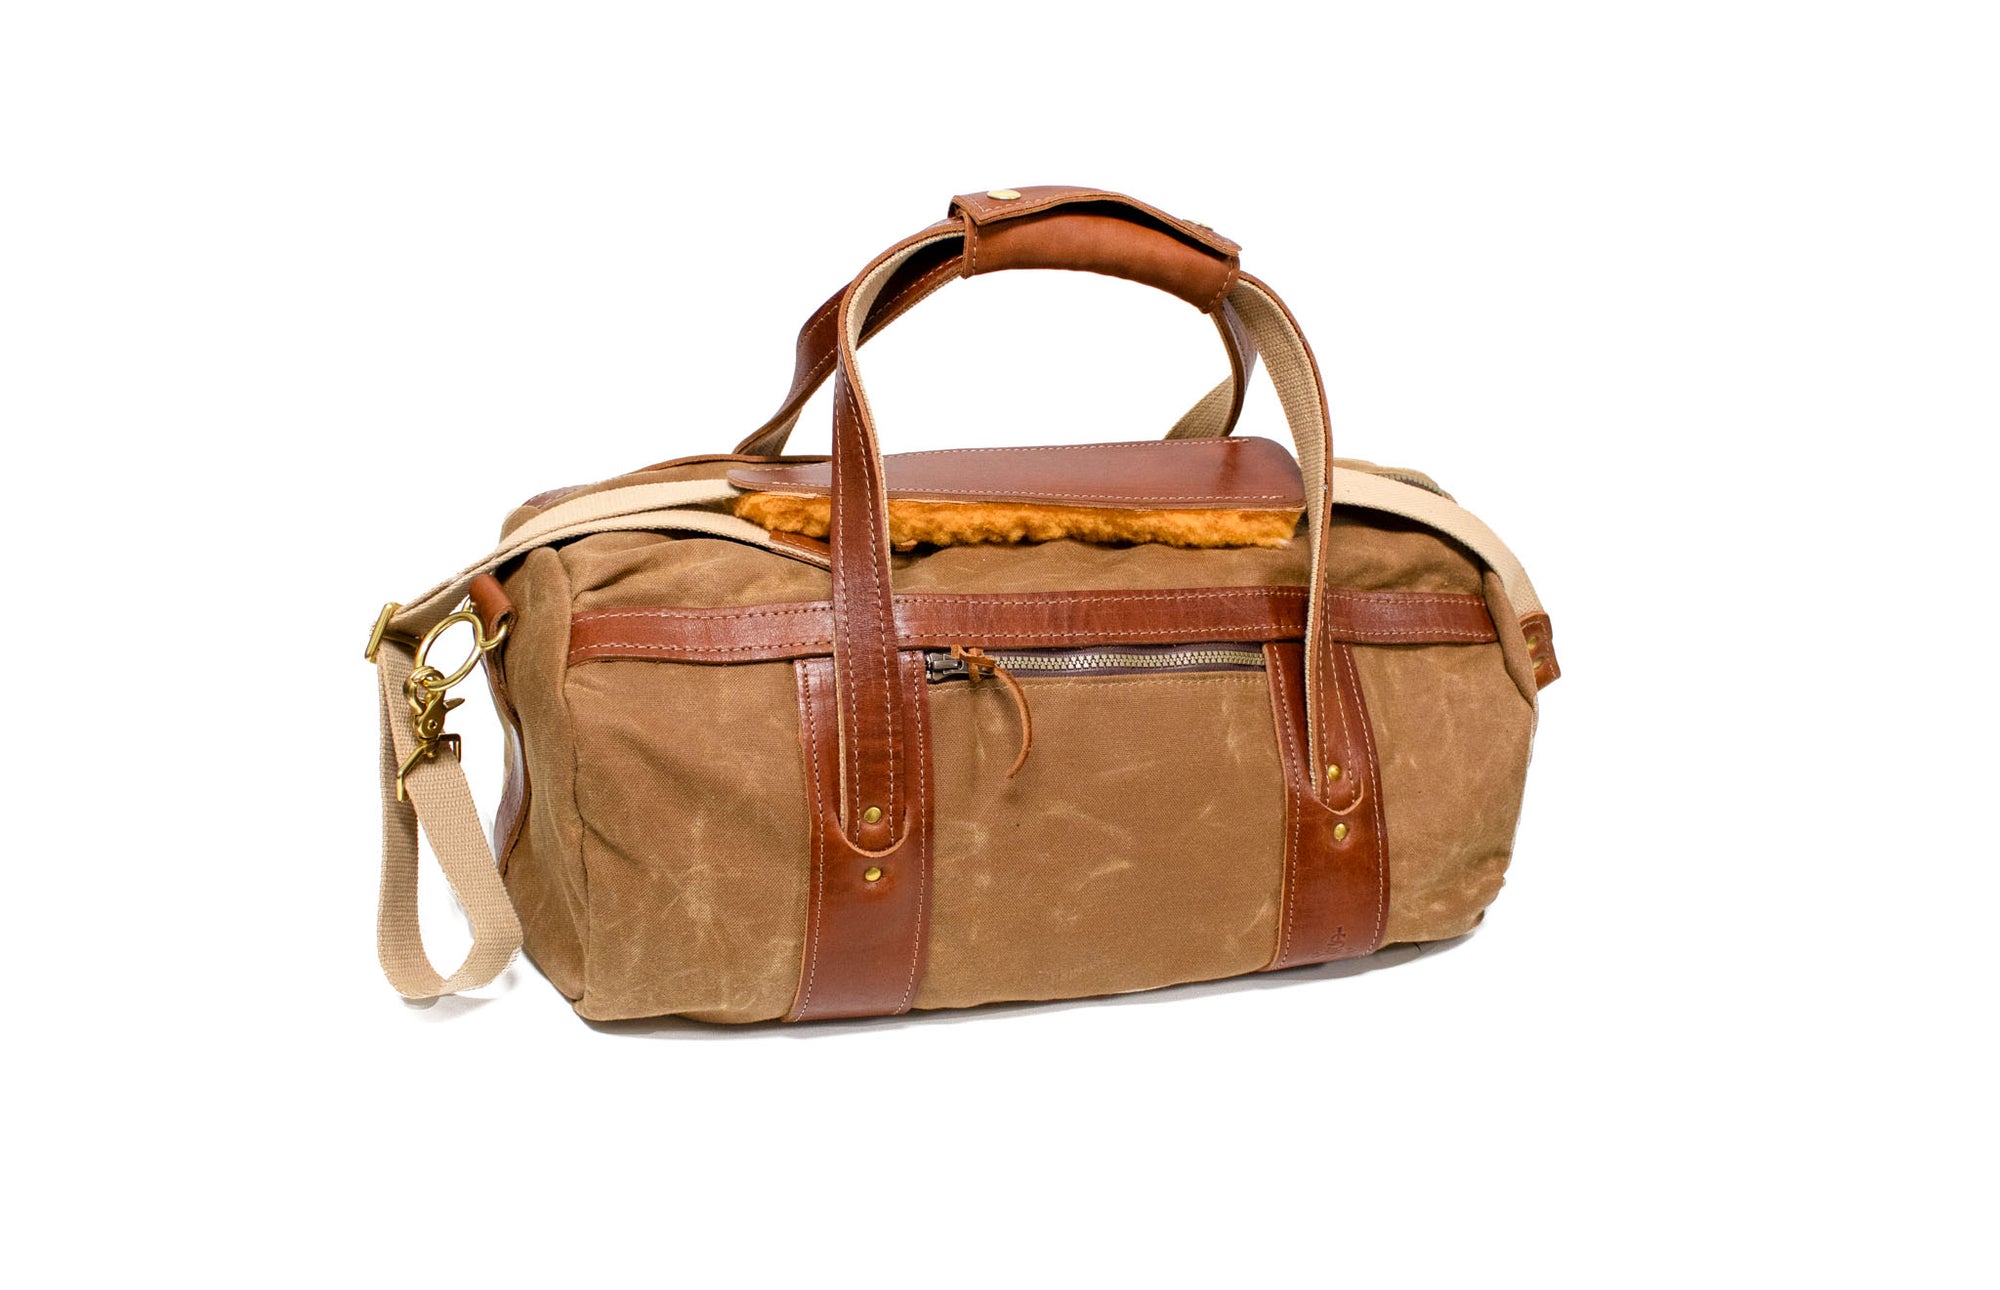 Field Tan and Natural Leather Club Duffel- Steurer & Jacoby